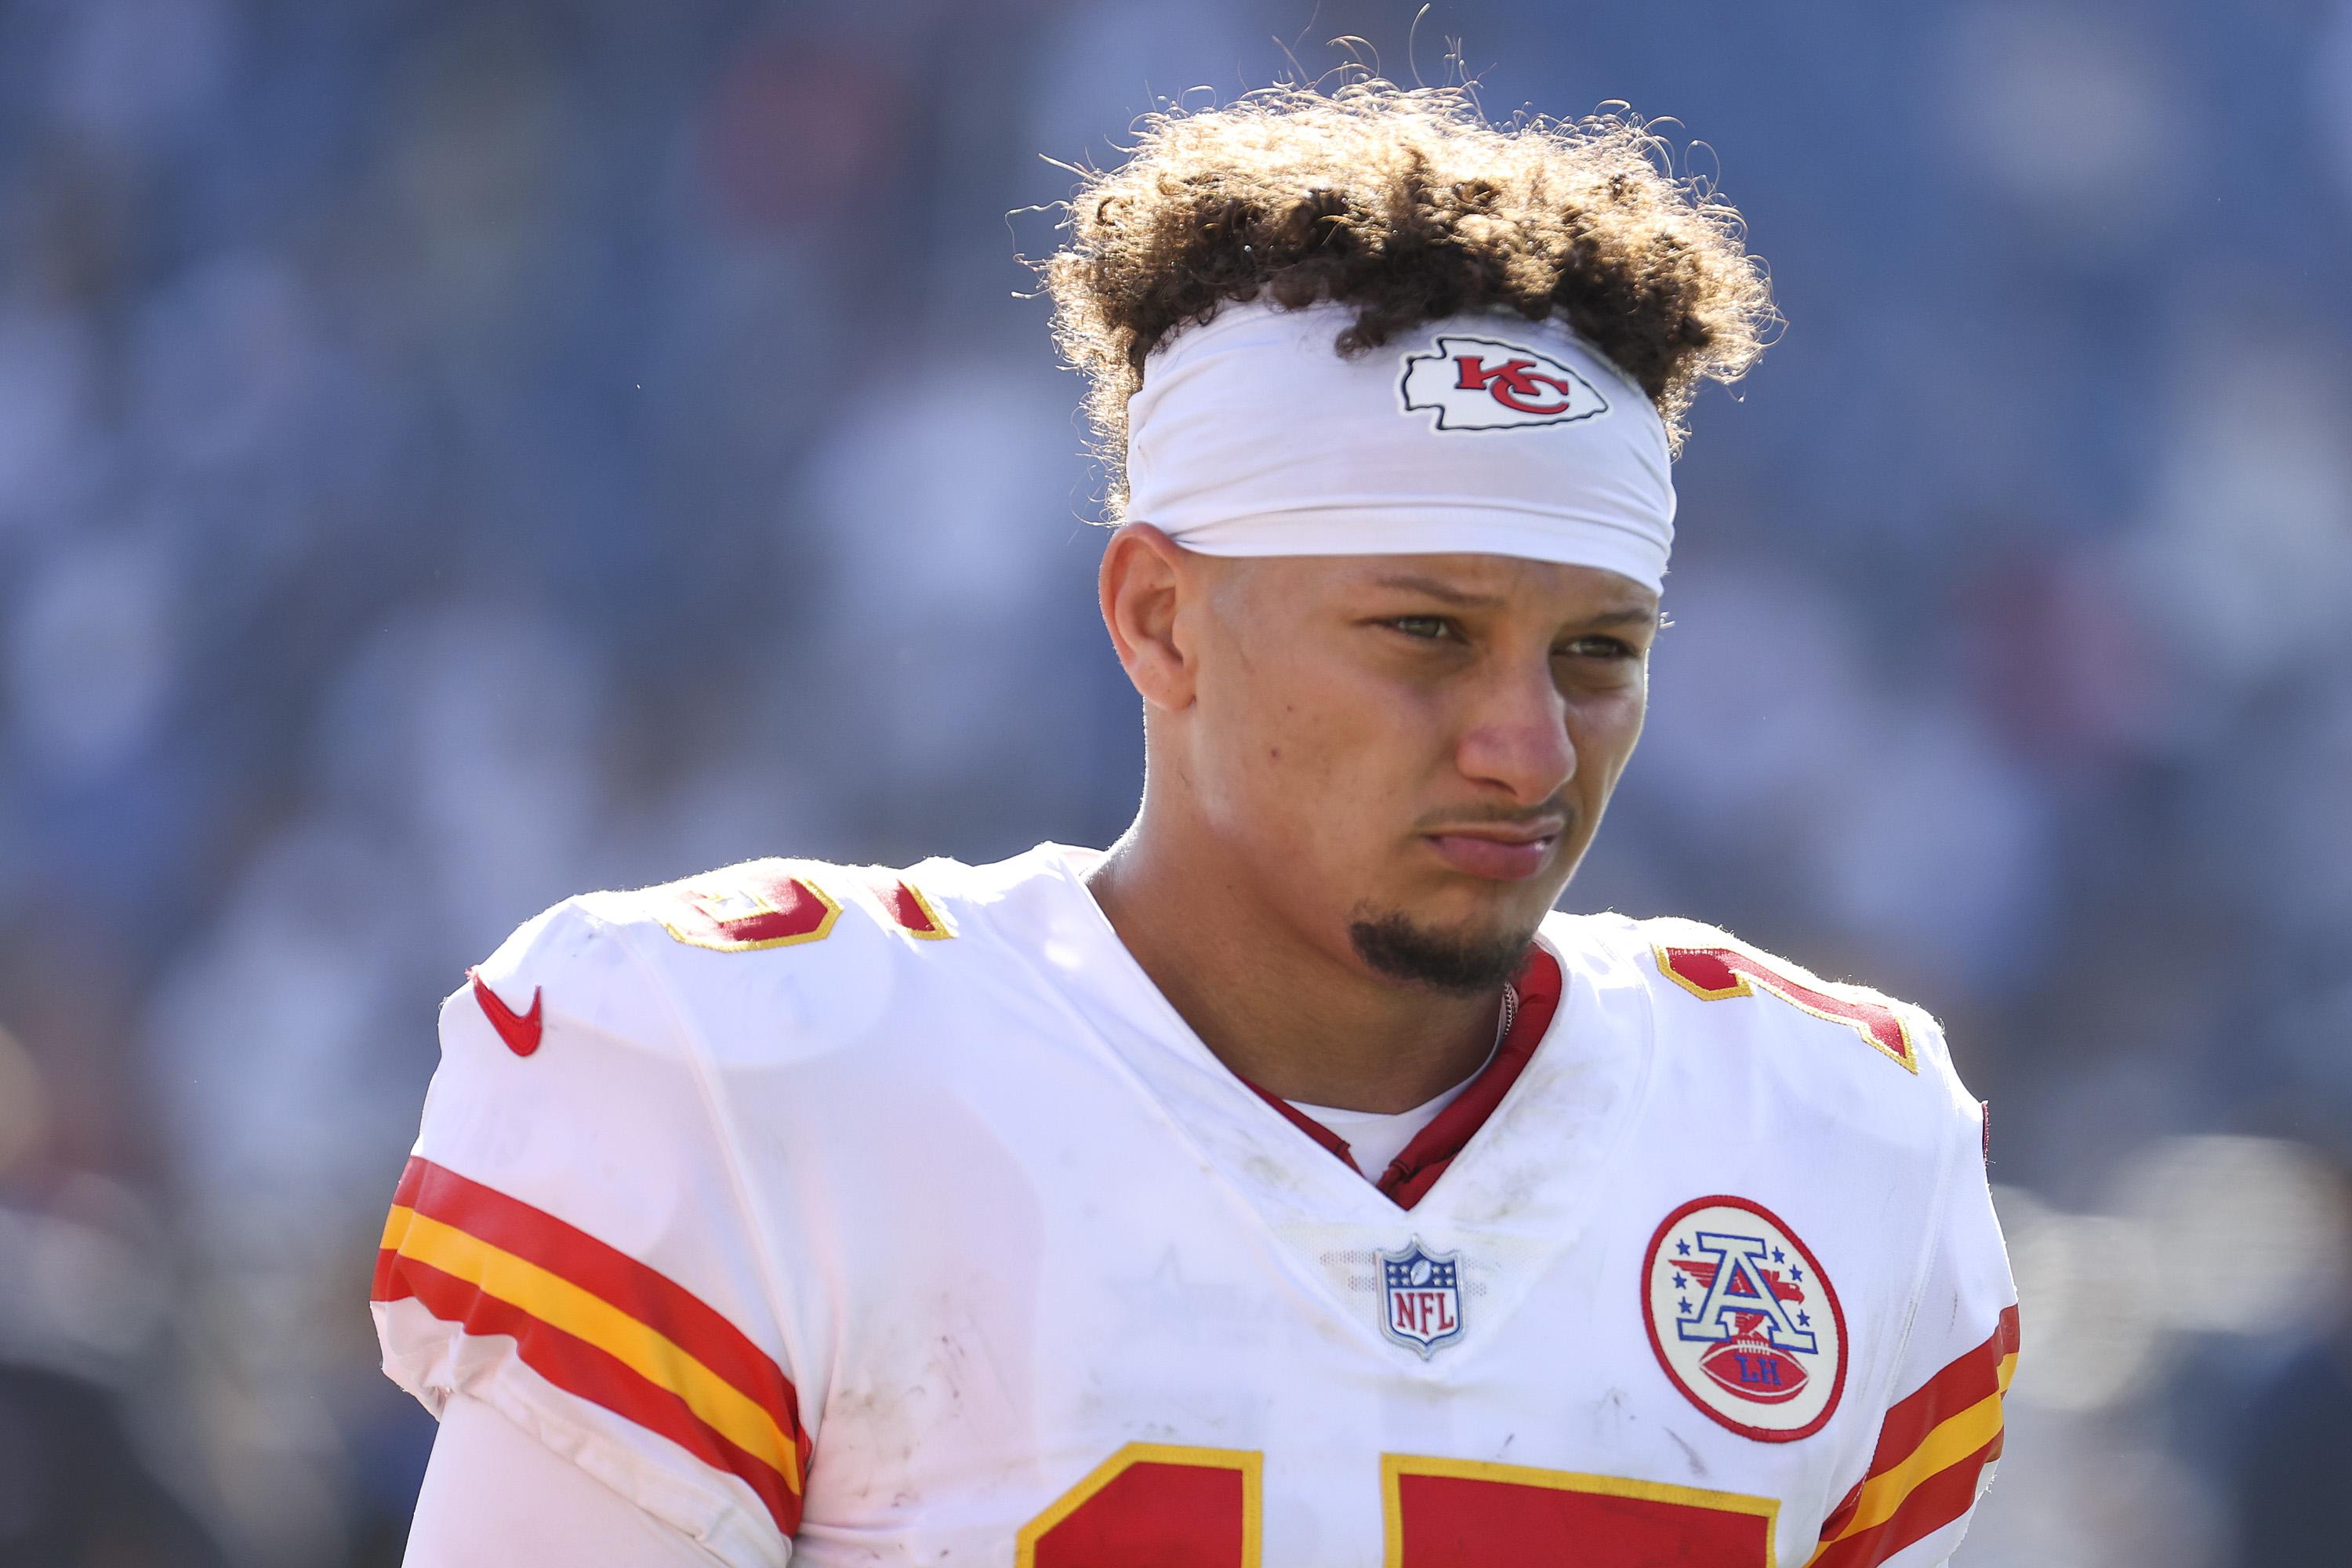 Mahomes in pads and uniform with his helmet off making a "not impressed"–style disappointed expression.